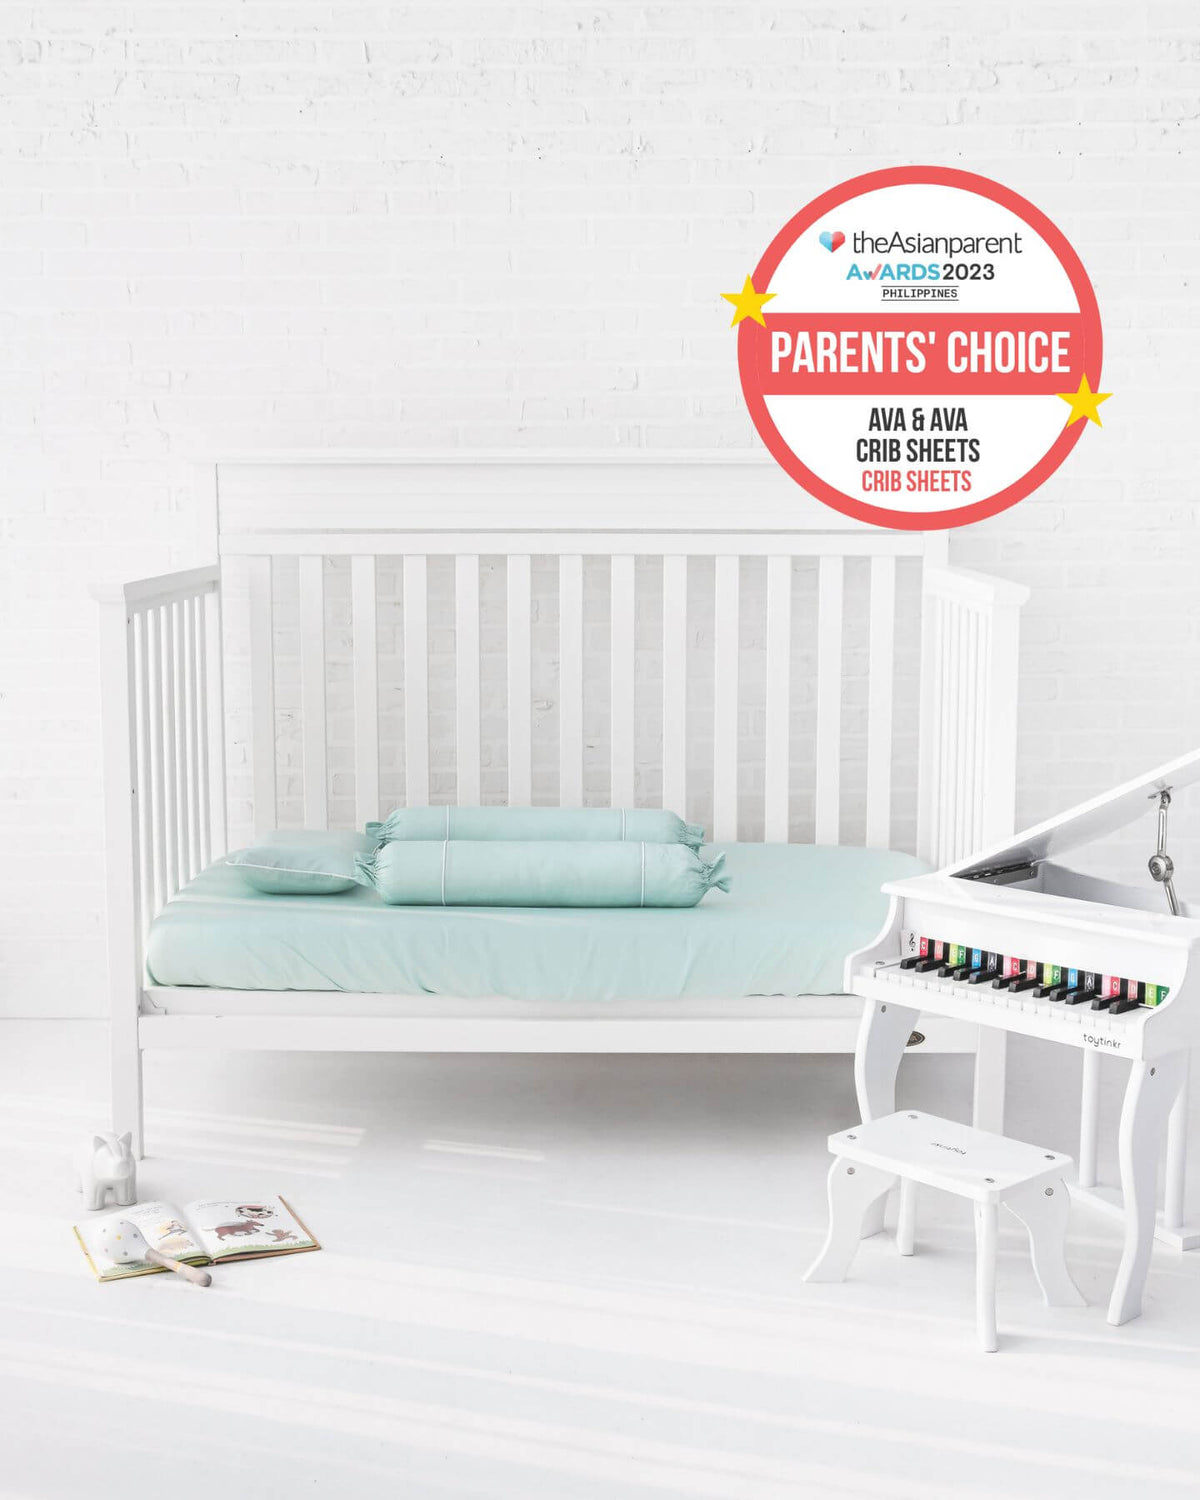 ava and ava ph organic bamboo lyocell baby bedding - crib fitted sheet, pillowcase, 2 bolstercases in silver lining (mint green with white piping). breathable soft. theasianparent awards philippines best crib sheets